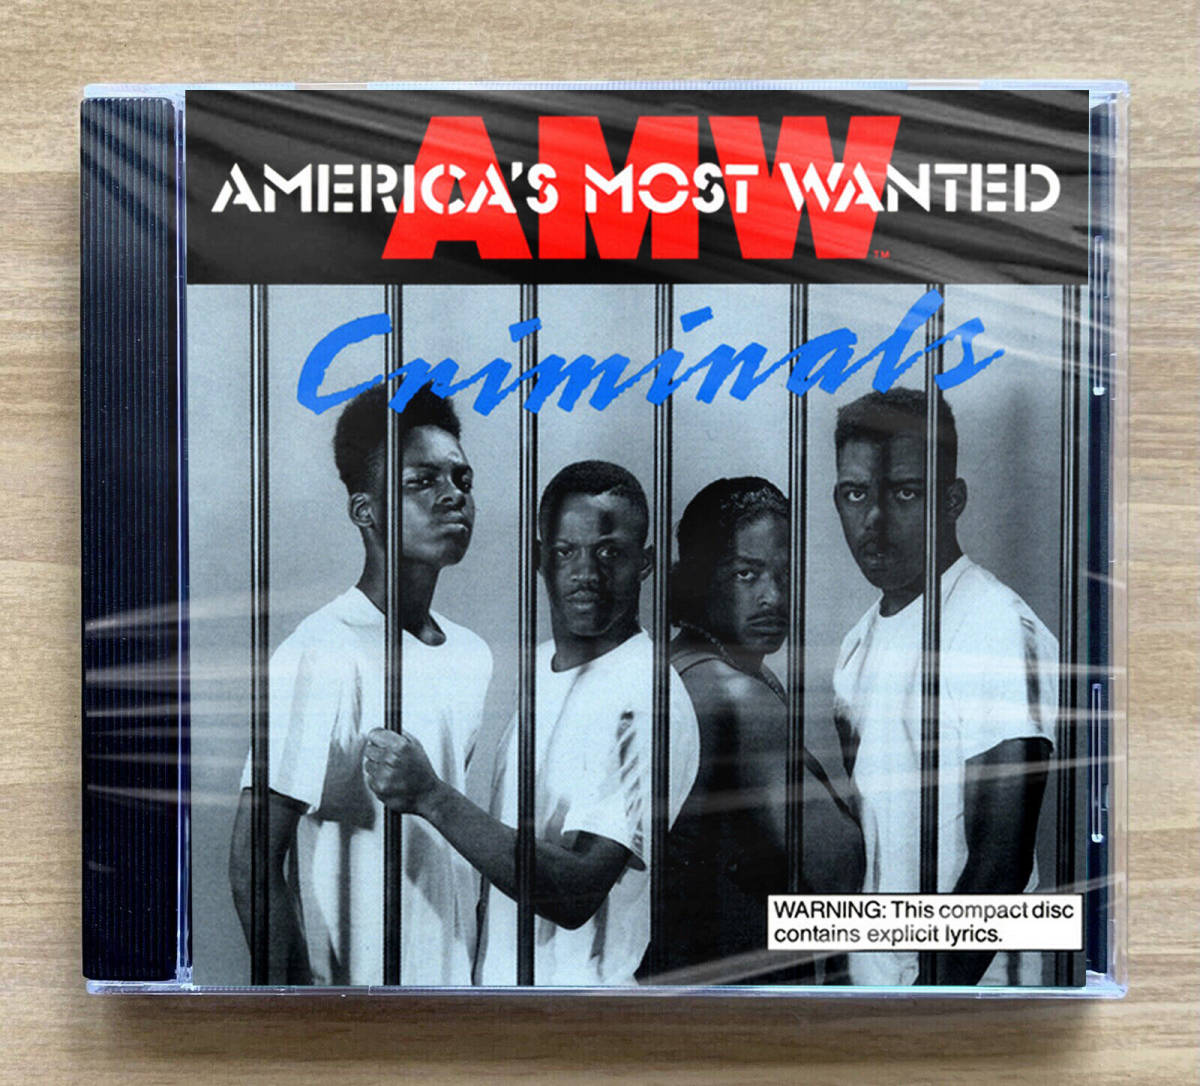 America's Most Wanted - Criminals (1990) Triad Records TG-007-1-2222-2 CD NEW 海外 即決_Americas Most Wan 1